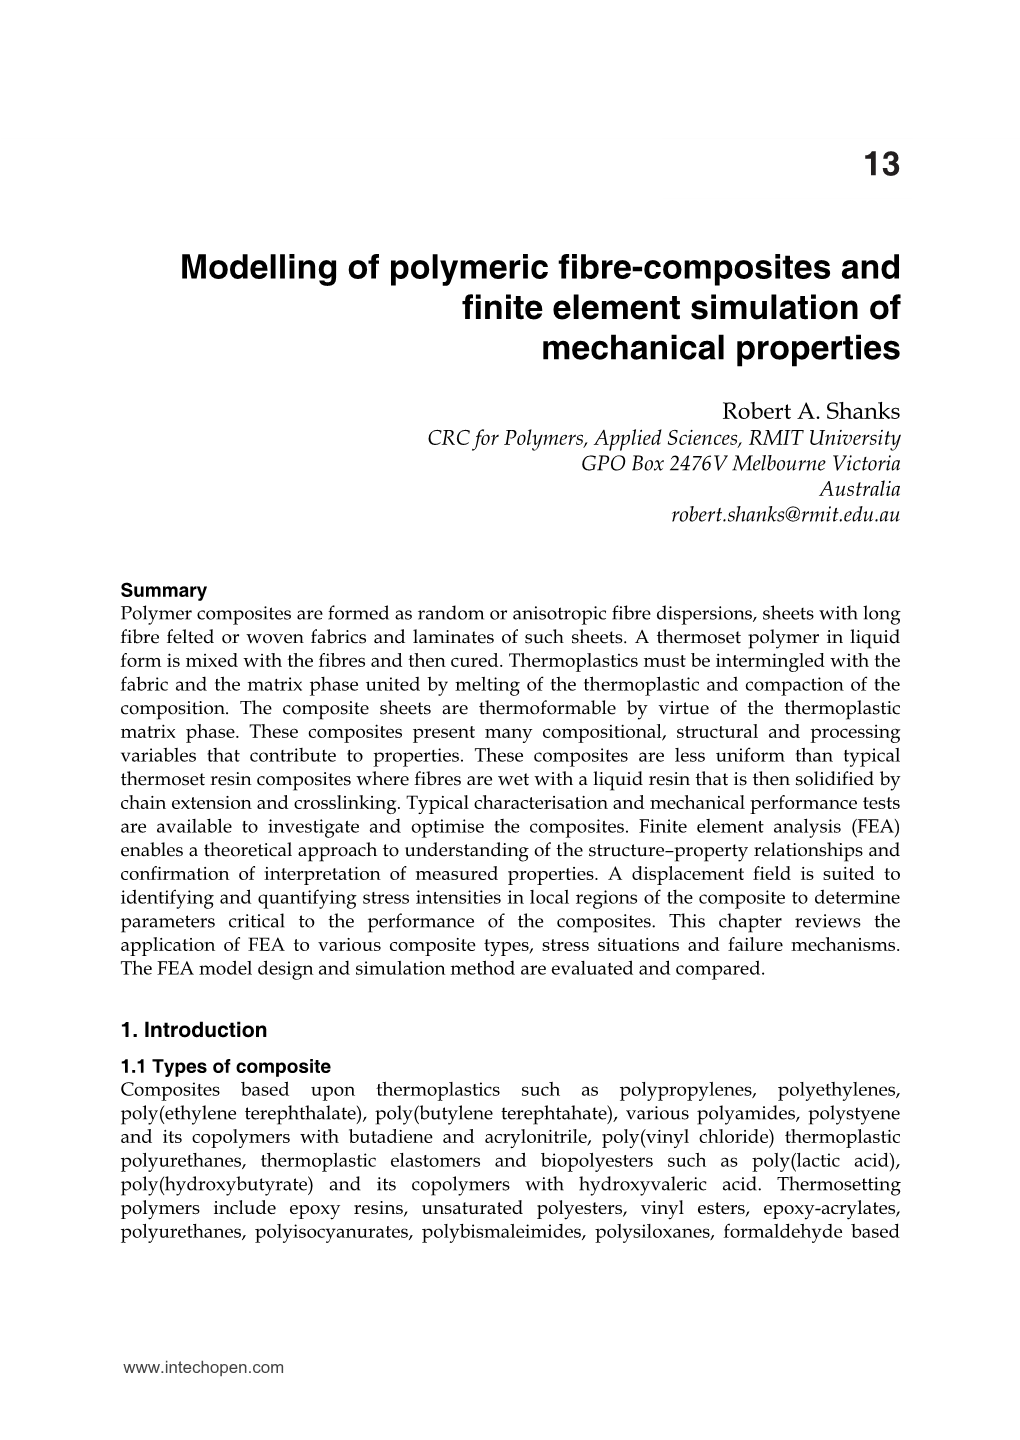 X Modelling of Polymeric Fibre-Composites and Finite Element